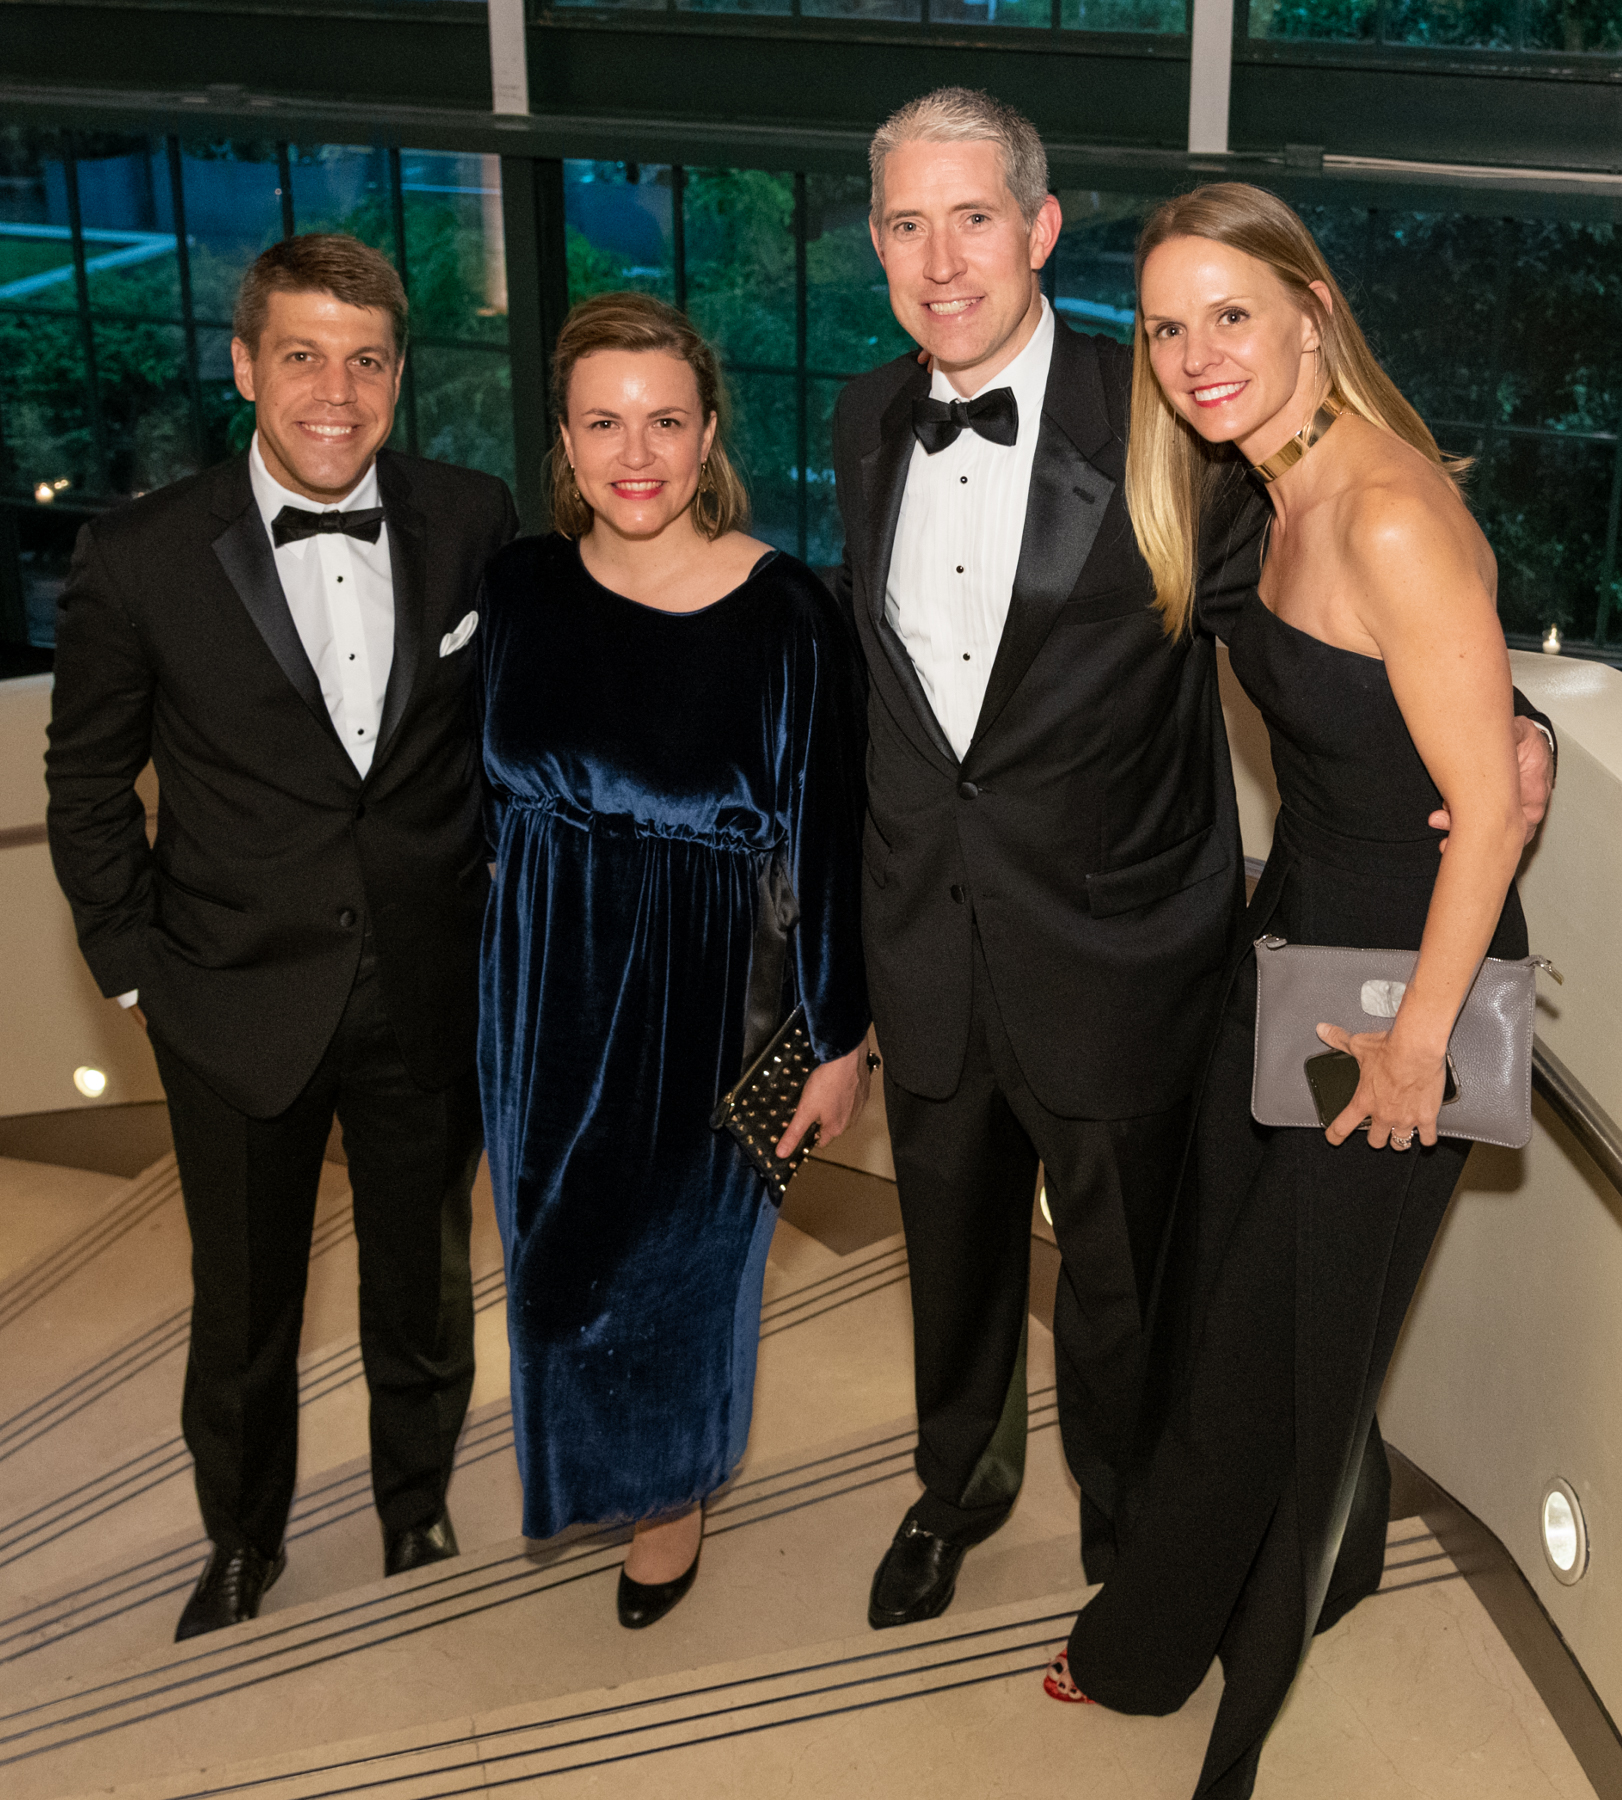 2018 Luxembourg American Business Award